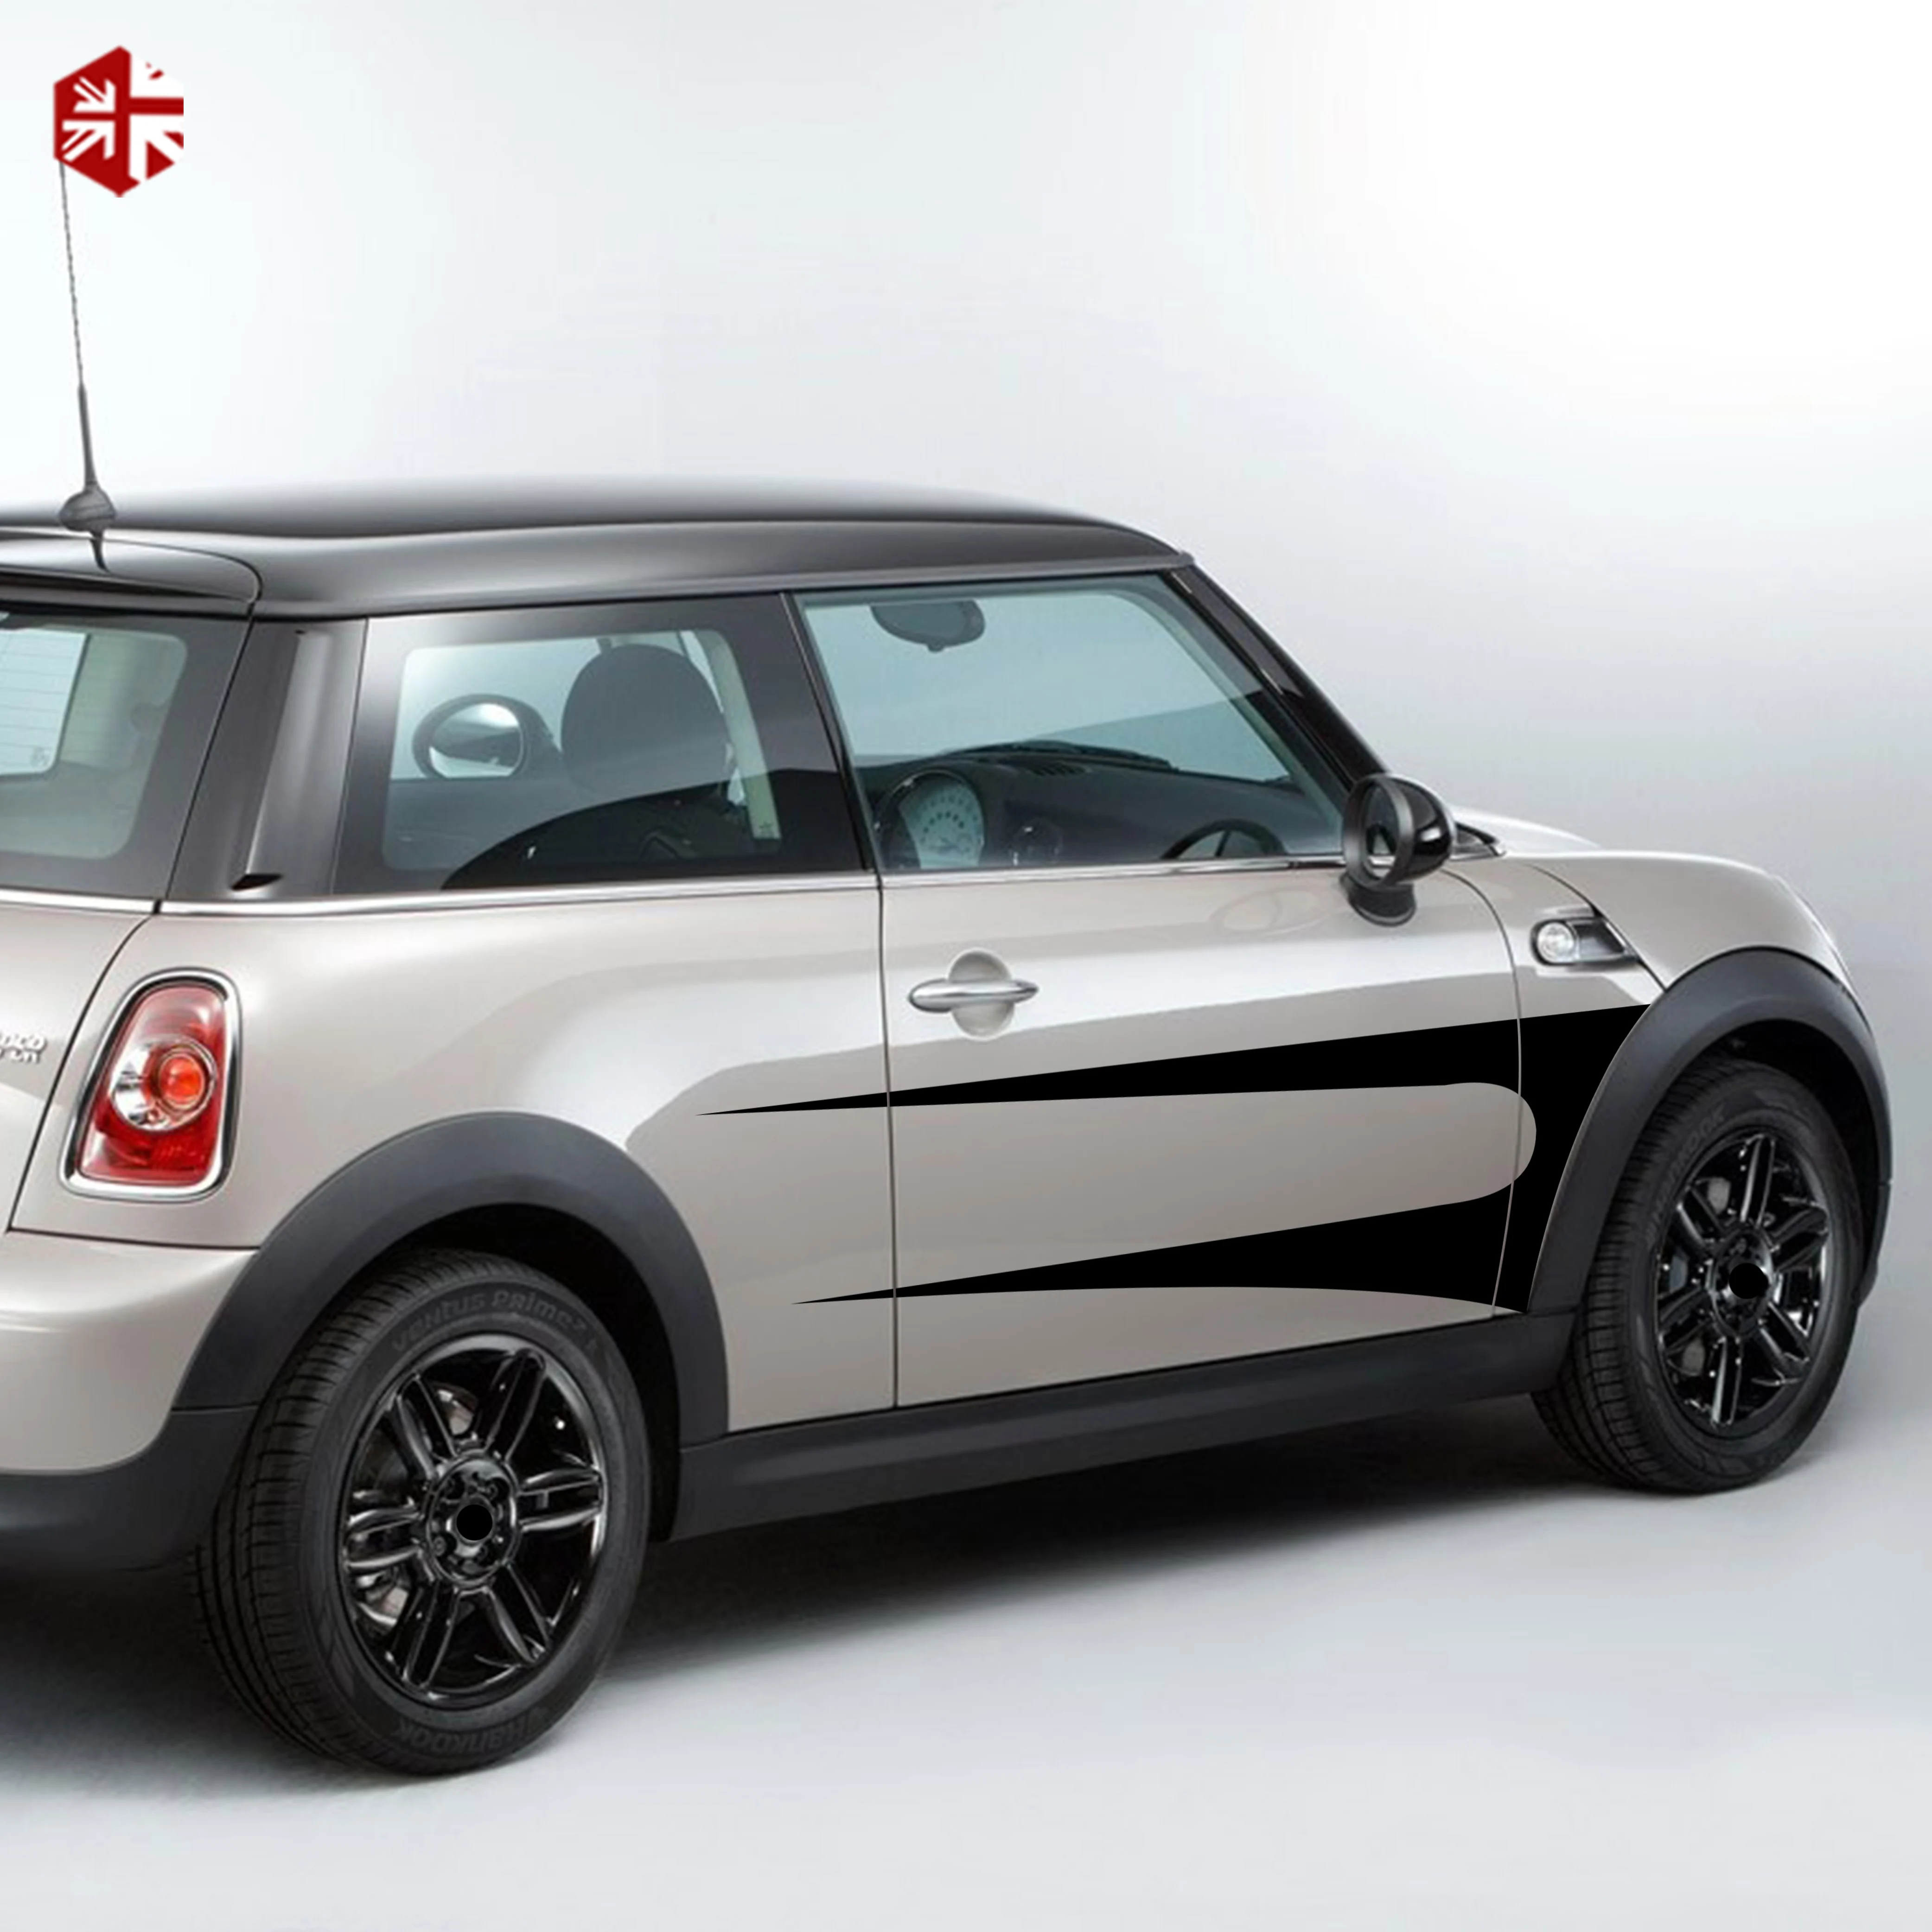 2X Car Styling Door Side Stripes Sticker Body Graphics Vinyl Decal For MINI Cooper S R56 2006-2013 One JCW Accessories